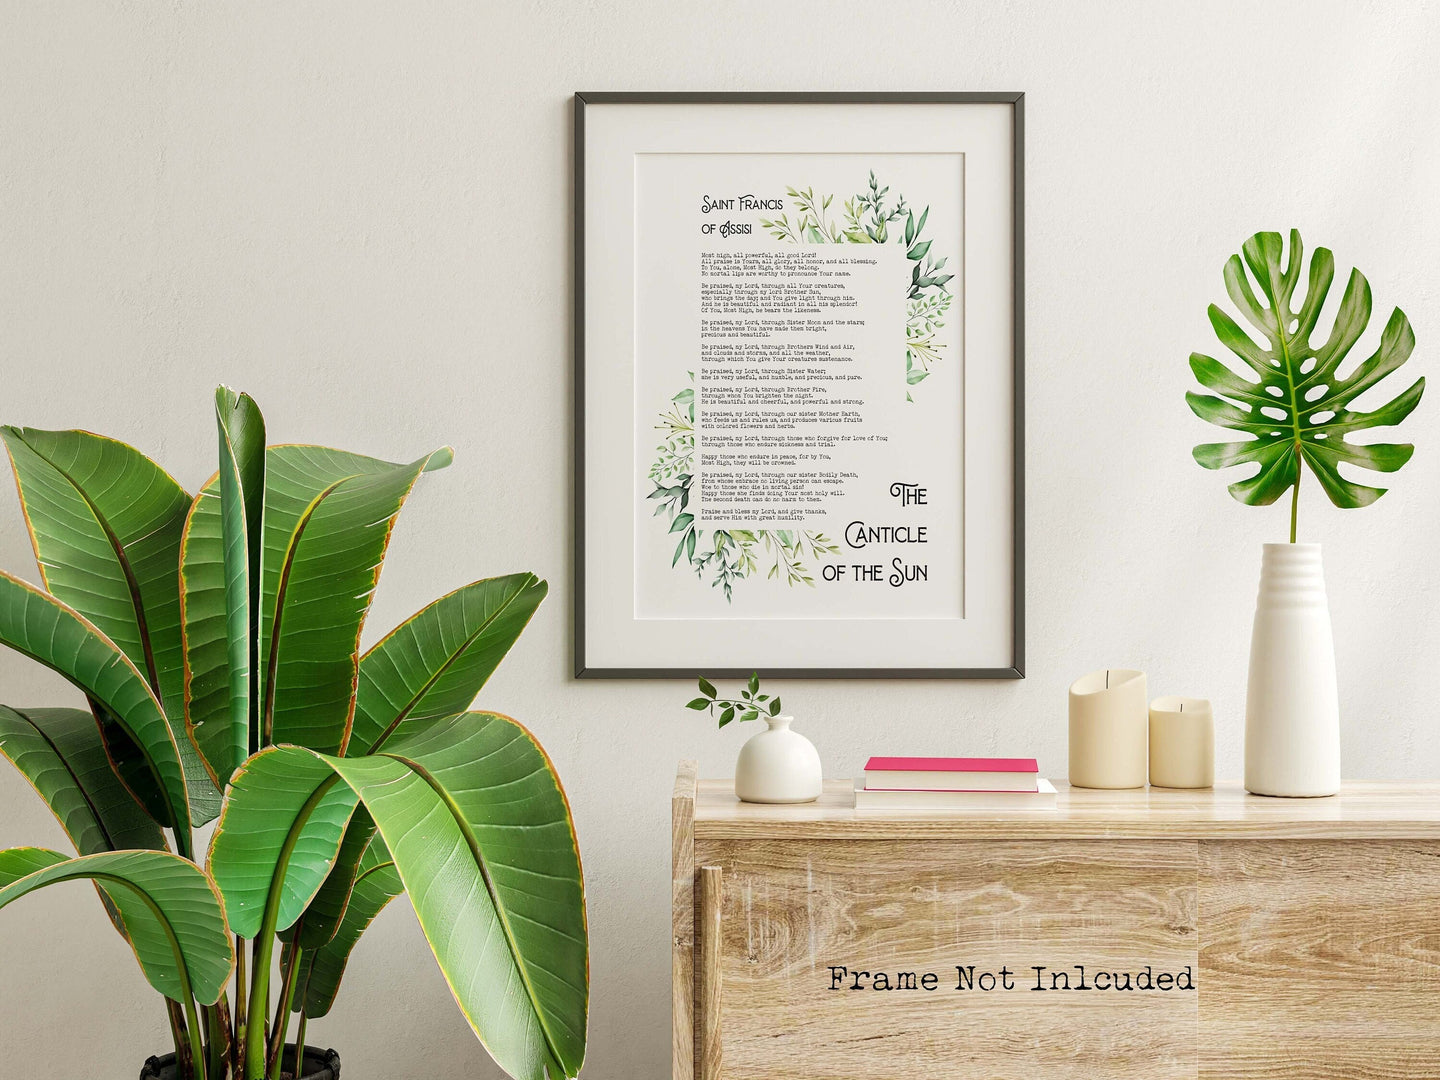 The Canticle of the Sun Print - Saint Francis of Assisi Wall Art